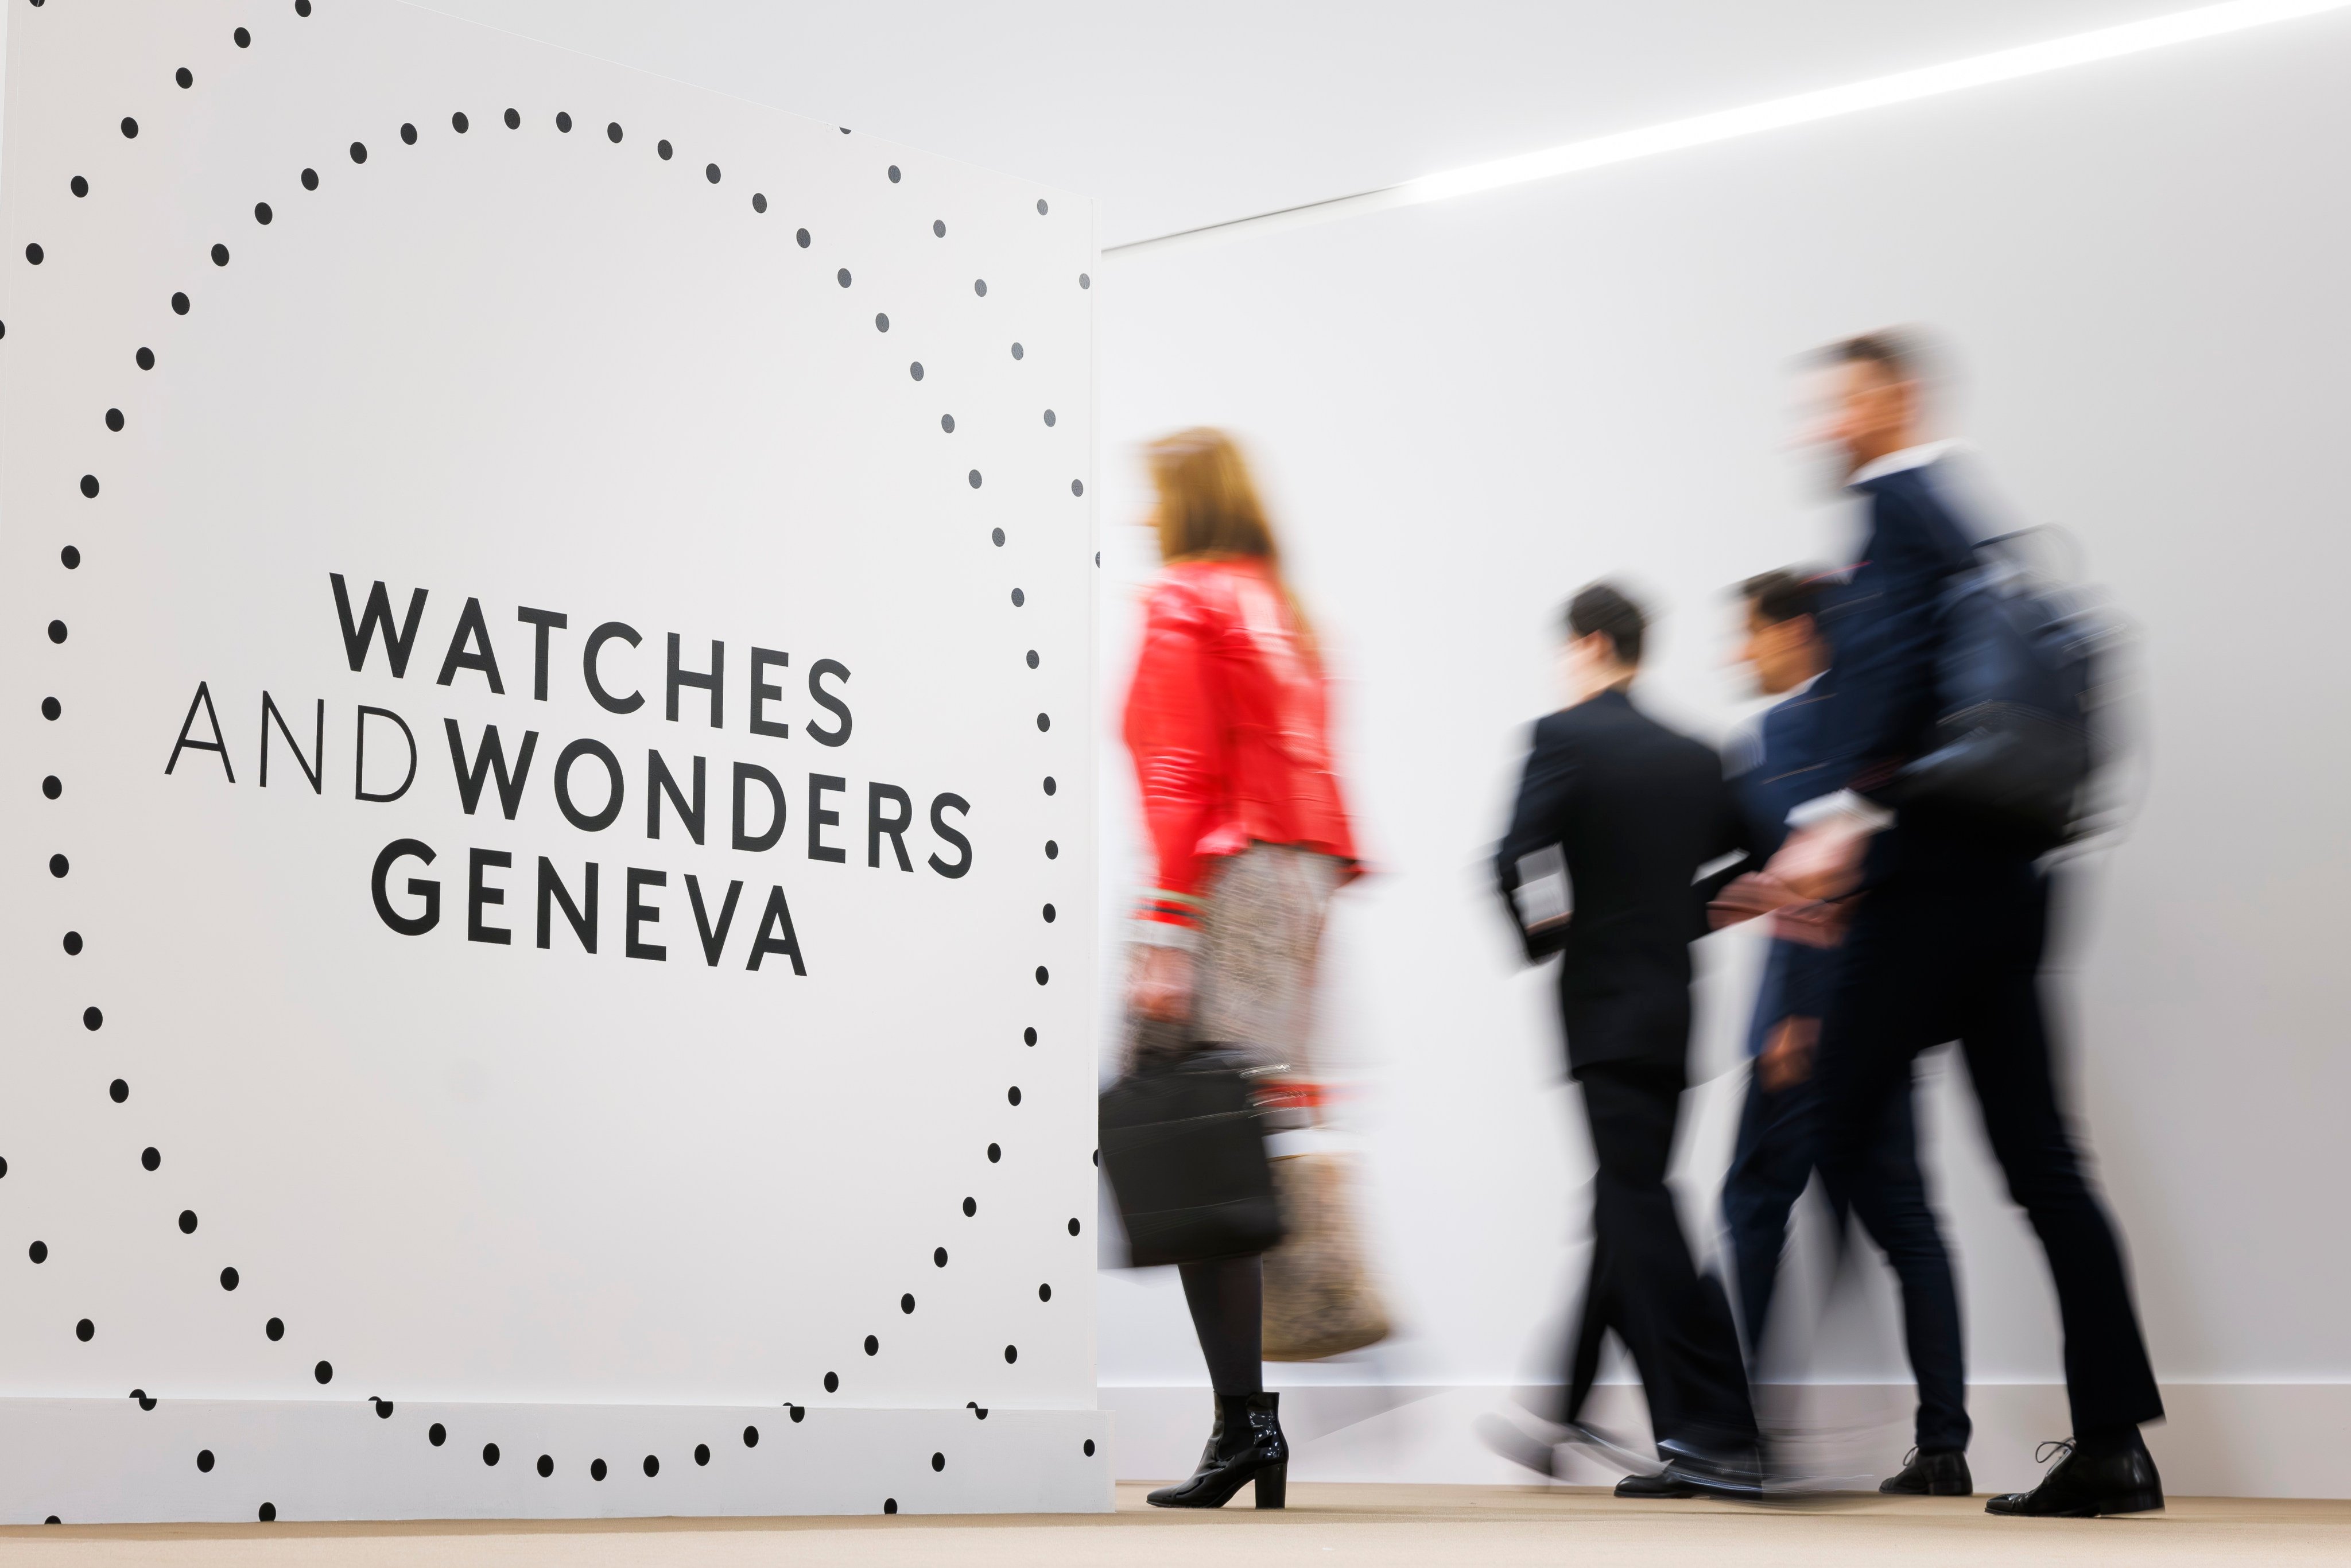 Watches and Wonders in Geneva brought together the leading names in watchmaking from April 9-15, as well as A-list watch ambassadors like Hublot’s Kylian Mbappé and IWC’s Gisele Bündchen. Photo: WWGF/Keystone